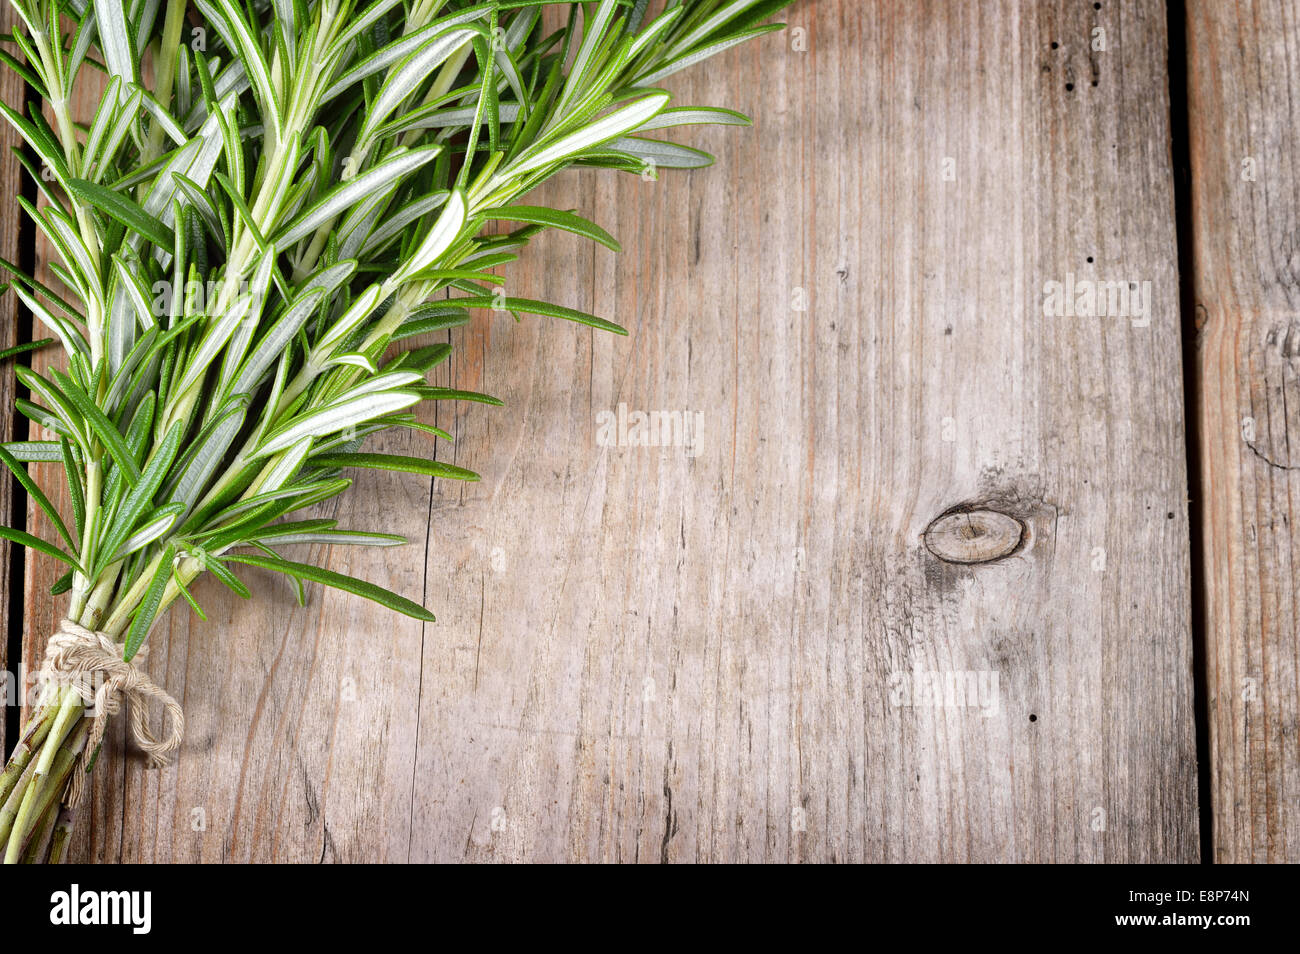 Fresh bunch of rosemary on wooden table. Aromatic evergreen herb, many culinary and medicinal uses. Stock Photo